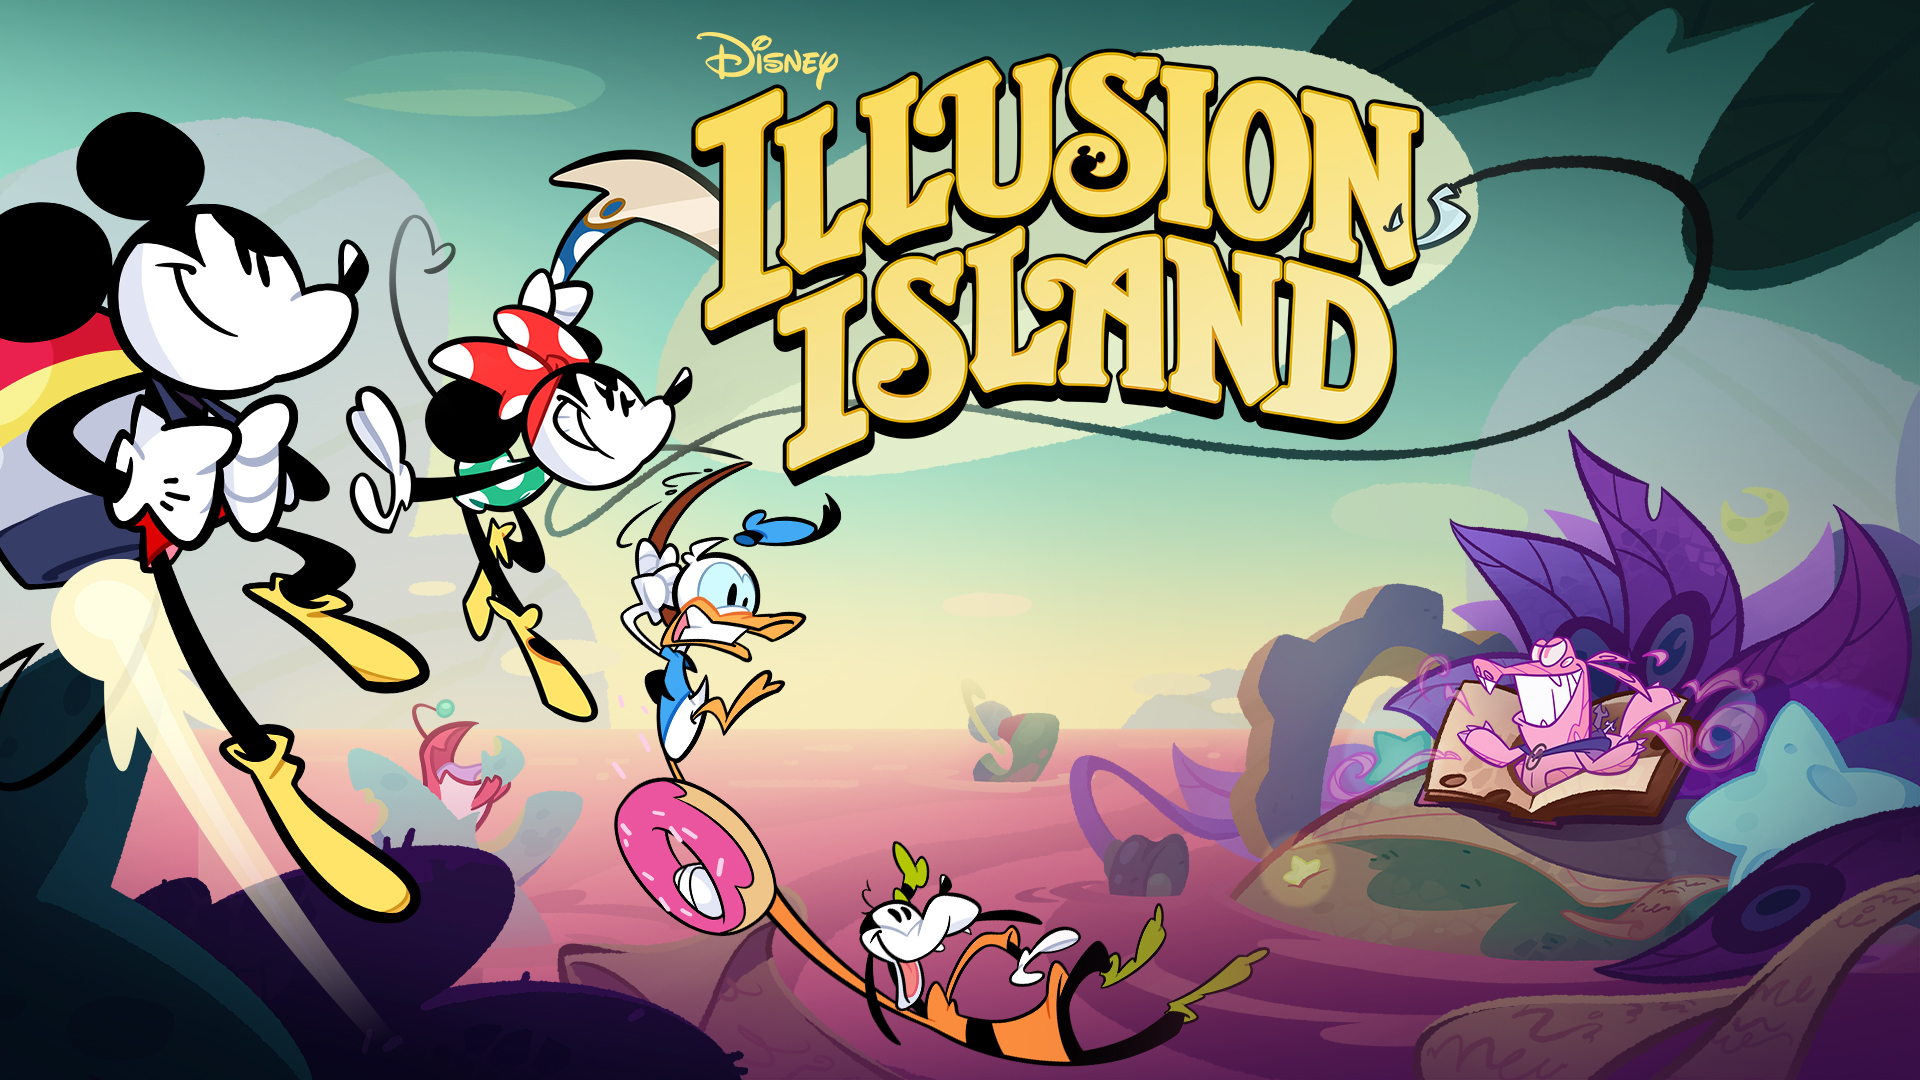 Explore a mysterious island with Mickey and friends in Disney Illusion Island